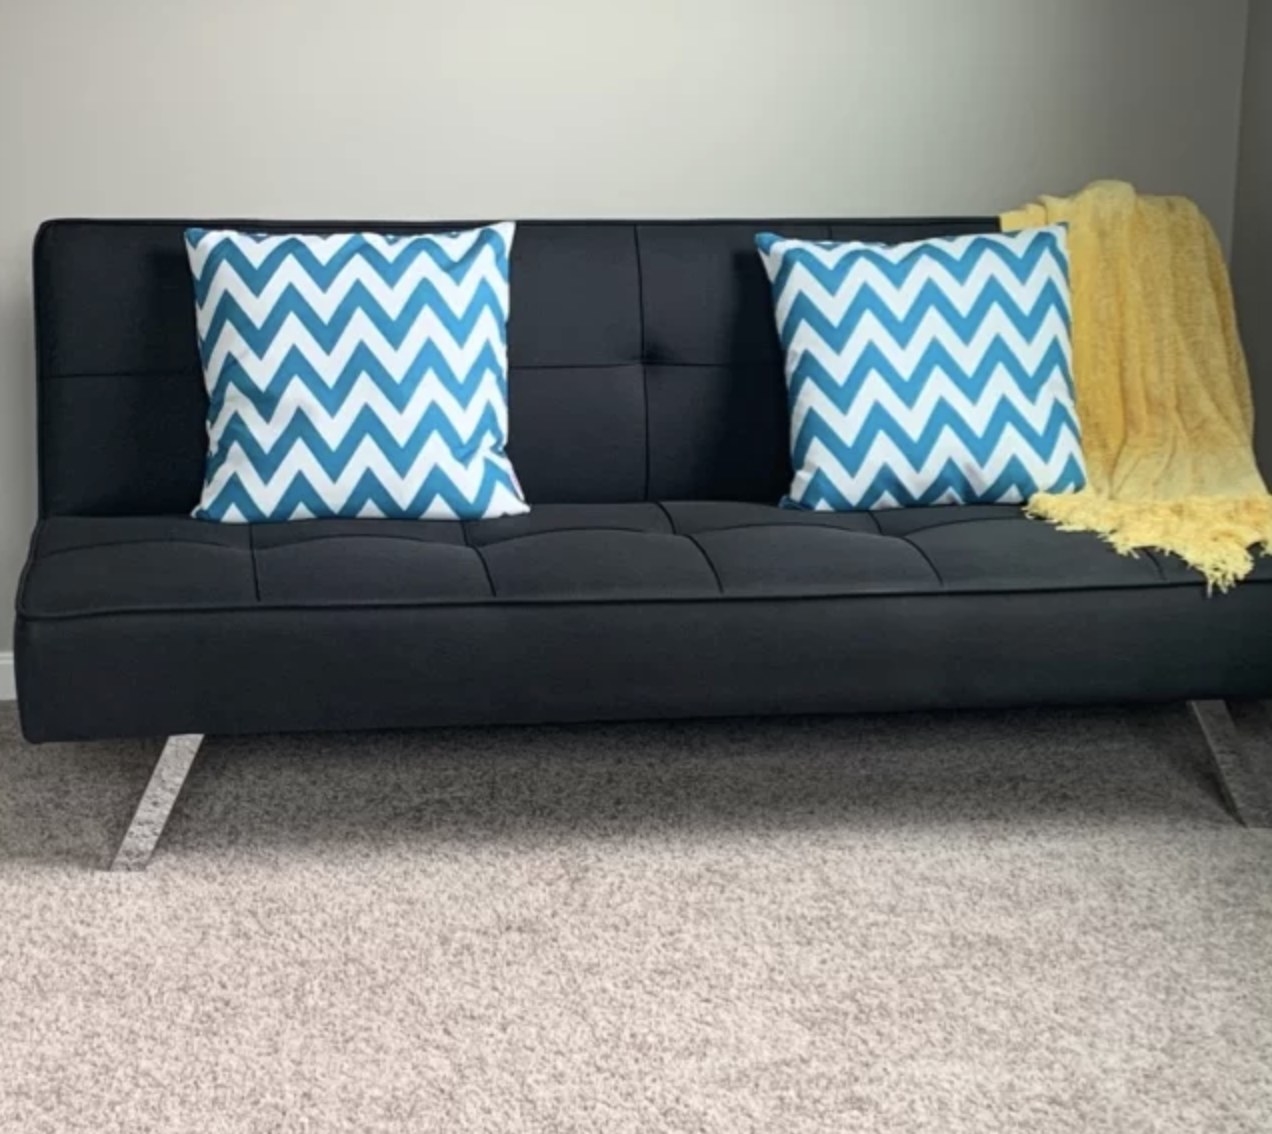 A reviewer&#x27;s black Serta futon with blue pillows on it